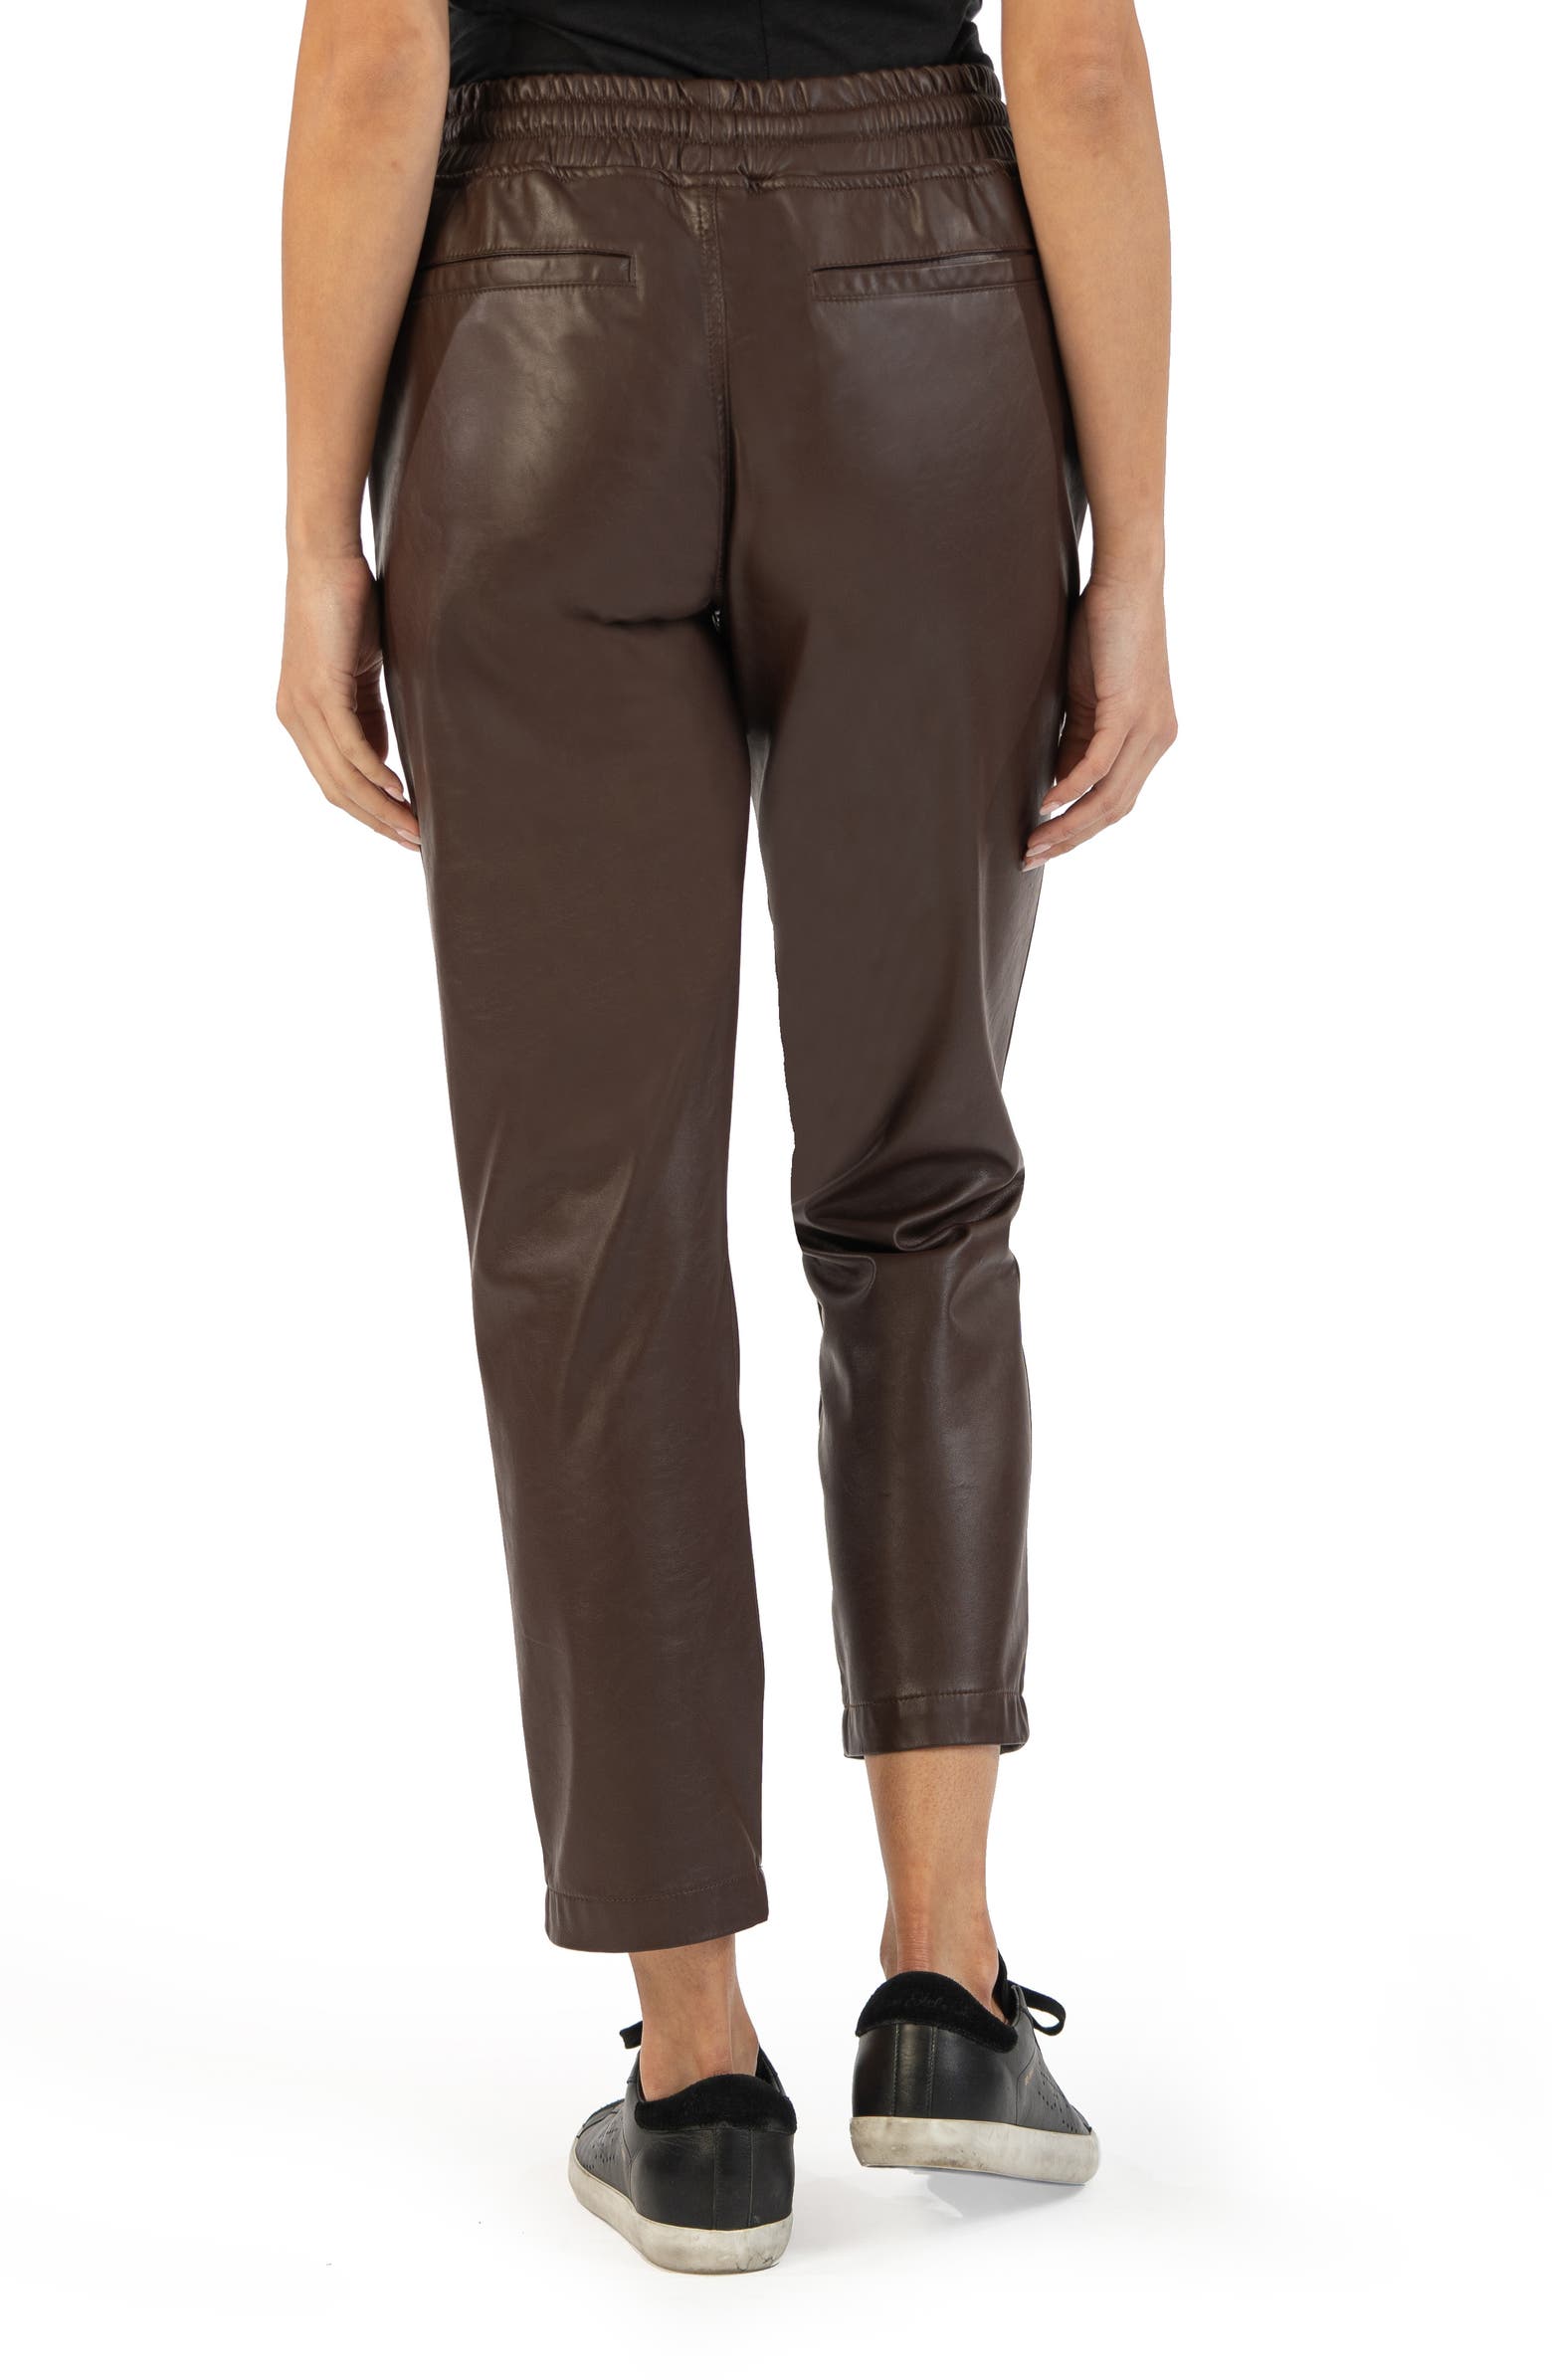 KUT from the Kloth Alanna Drawstring Coated Pants | Nordstrom